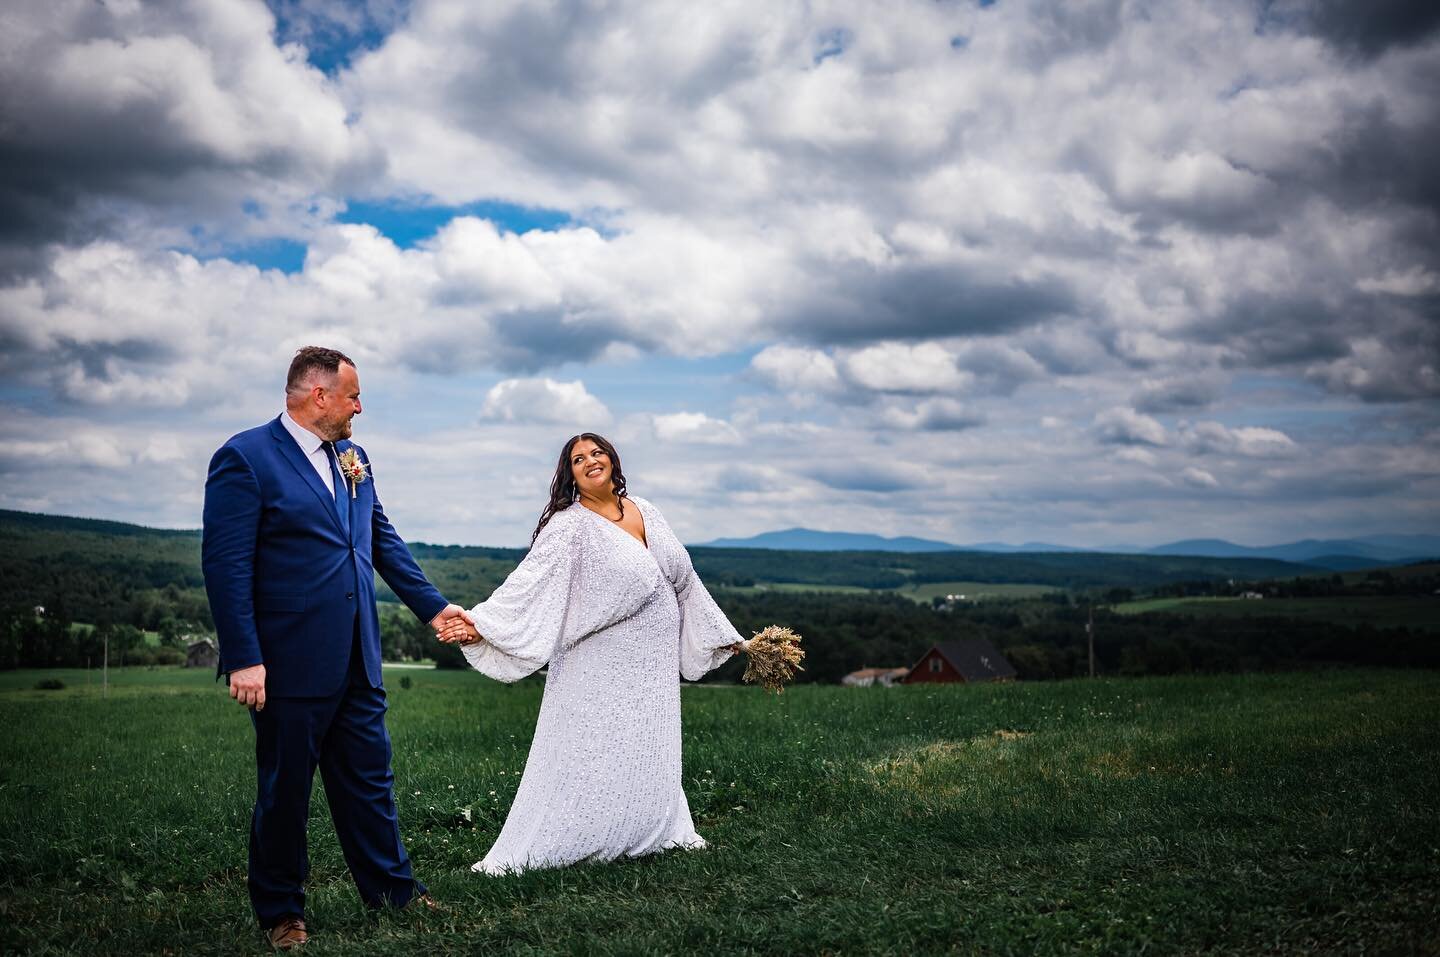 Forever begins in the serene beauty of the Catskills. Celebrating Raquel and Warren&rsquo;s love in a magical elopement. 💍✨ 

#CatskillsLove #ElopementMagic
 #kalzphotography #catskillsweddingphotographer #upstatenyweddingphotographer #weddingphotog